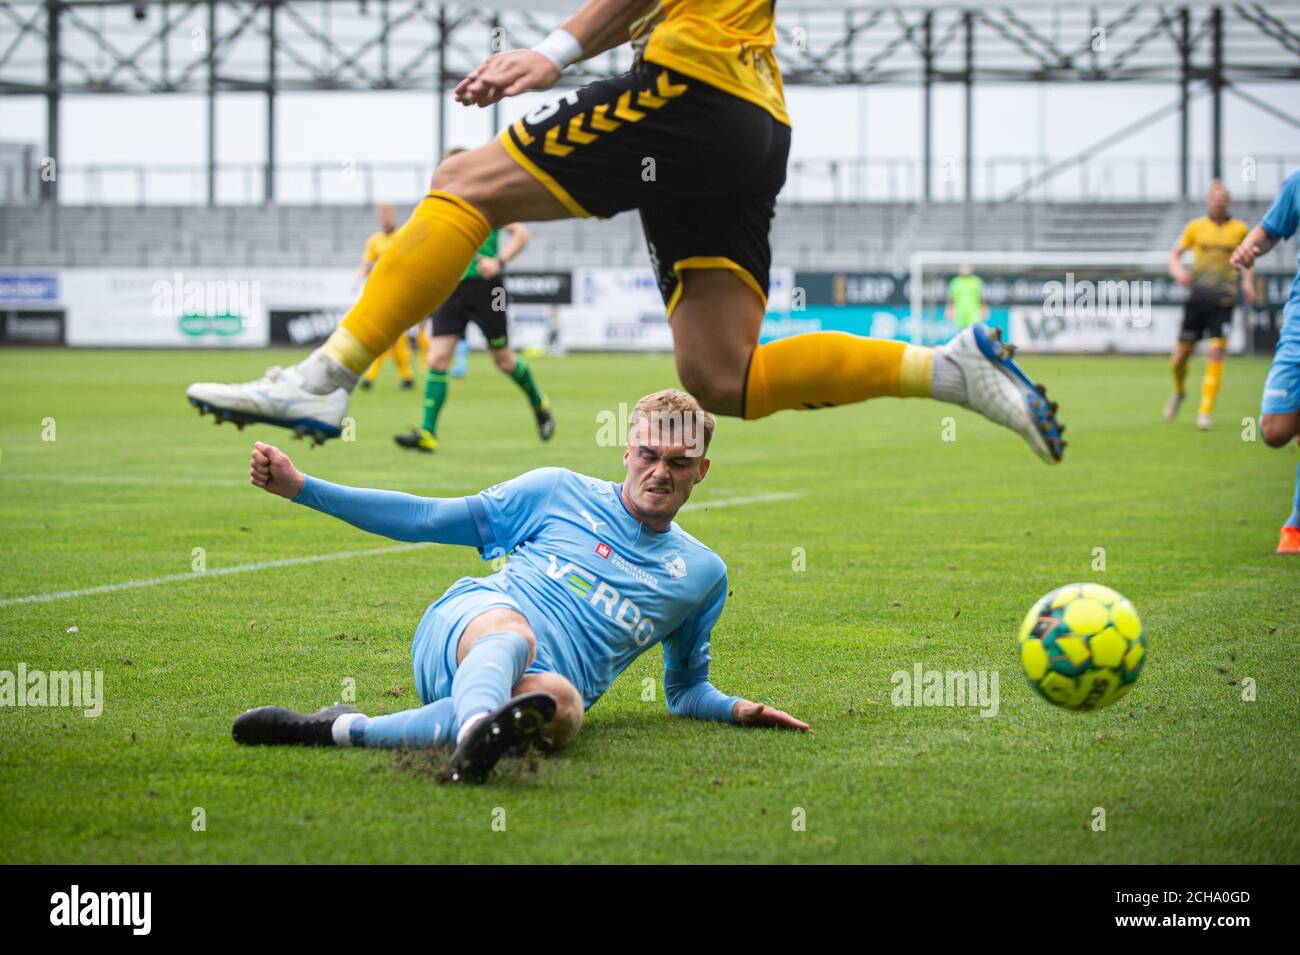 Ac horsens fc stock photography and images Alamy